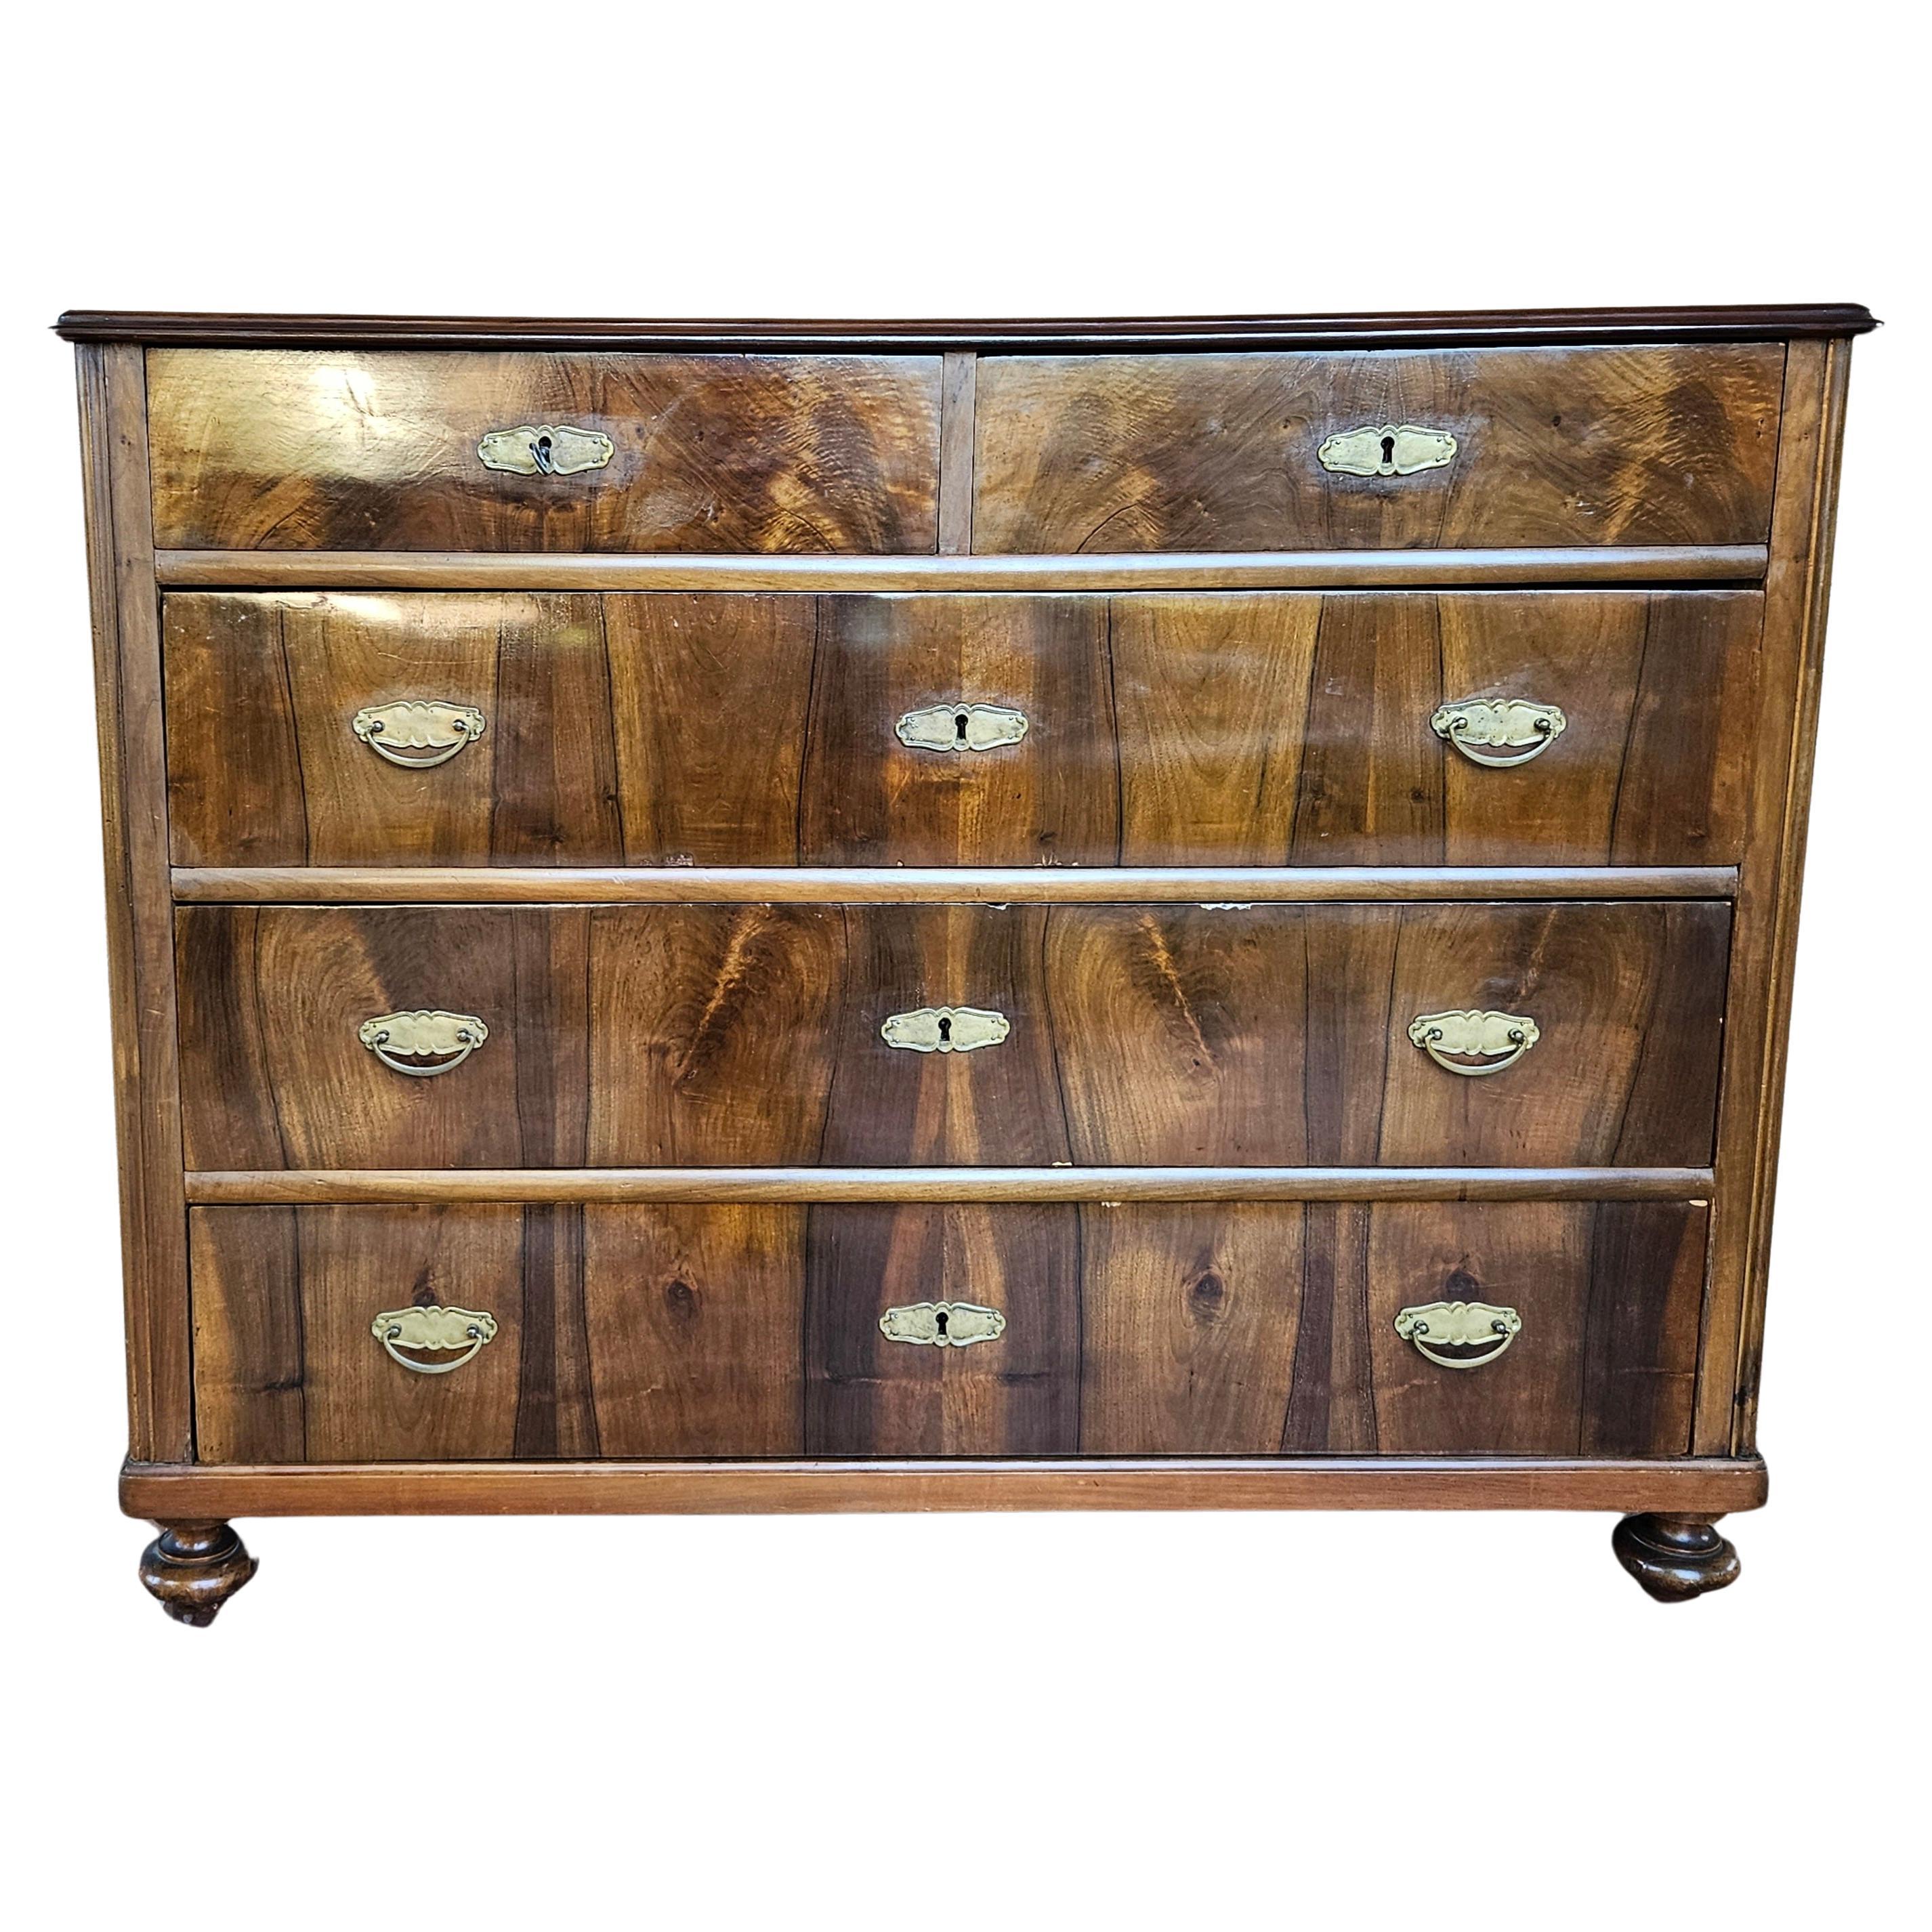 Early 20th century Art Nouveau dresser with five drawers For Sale